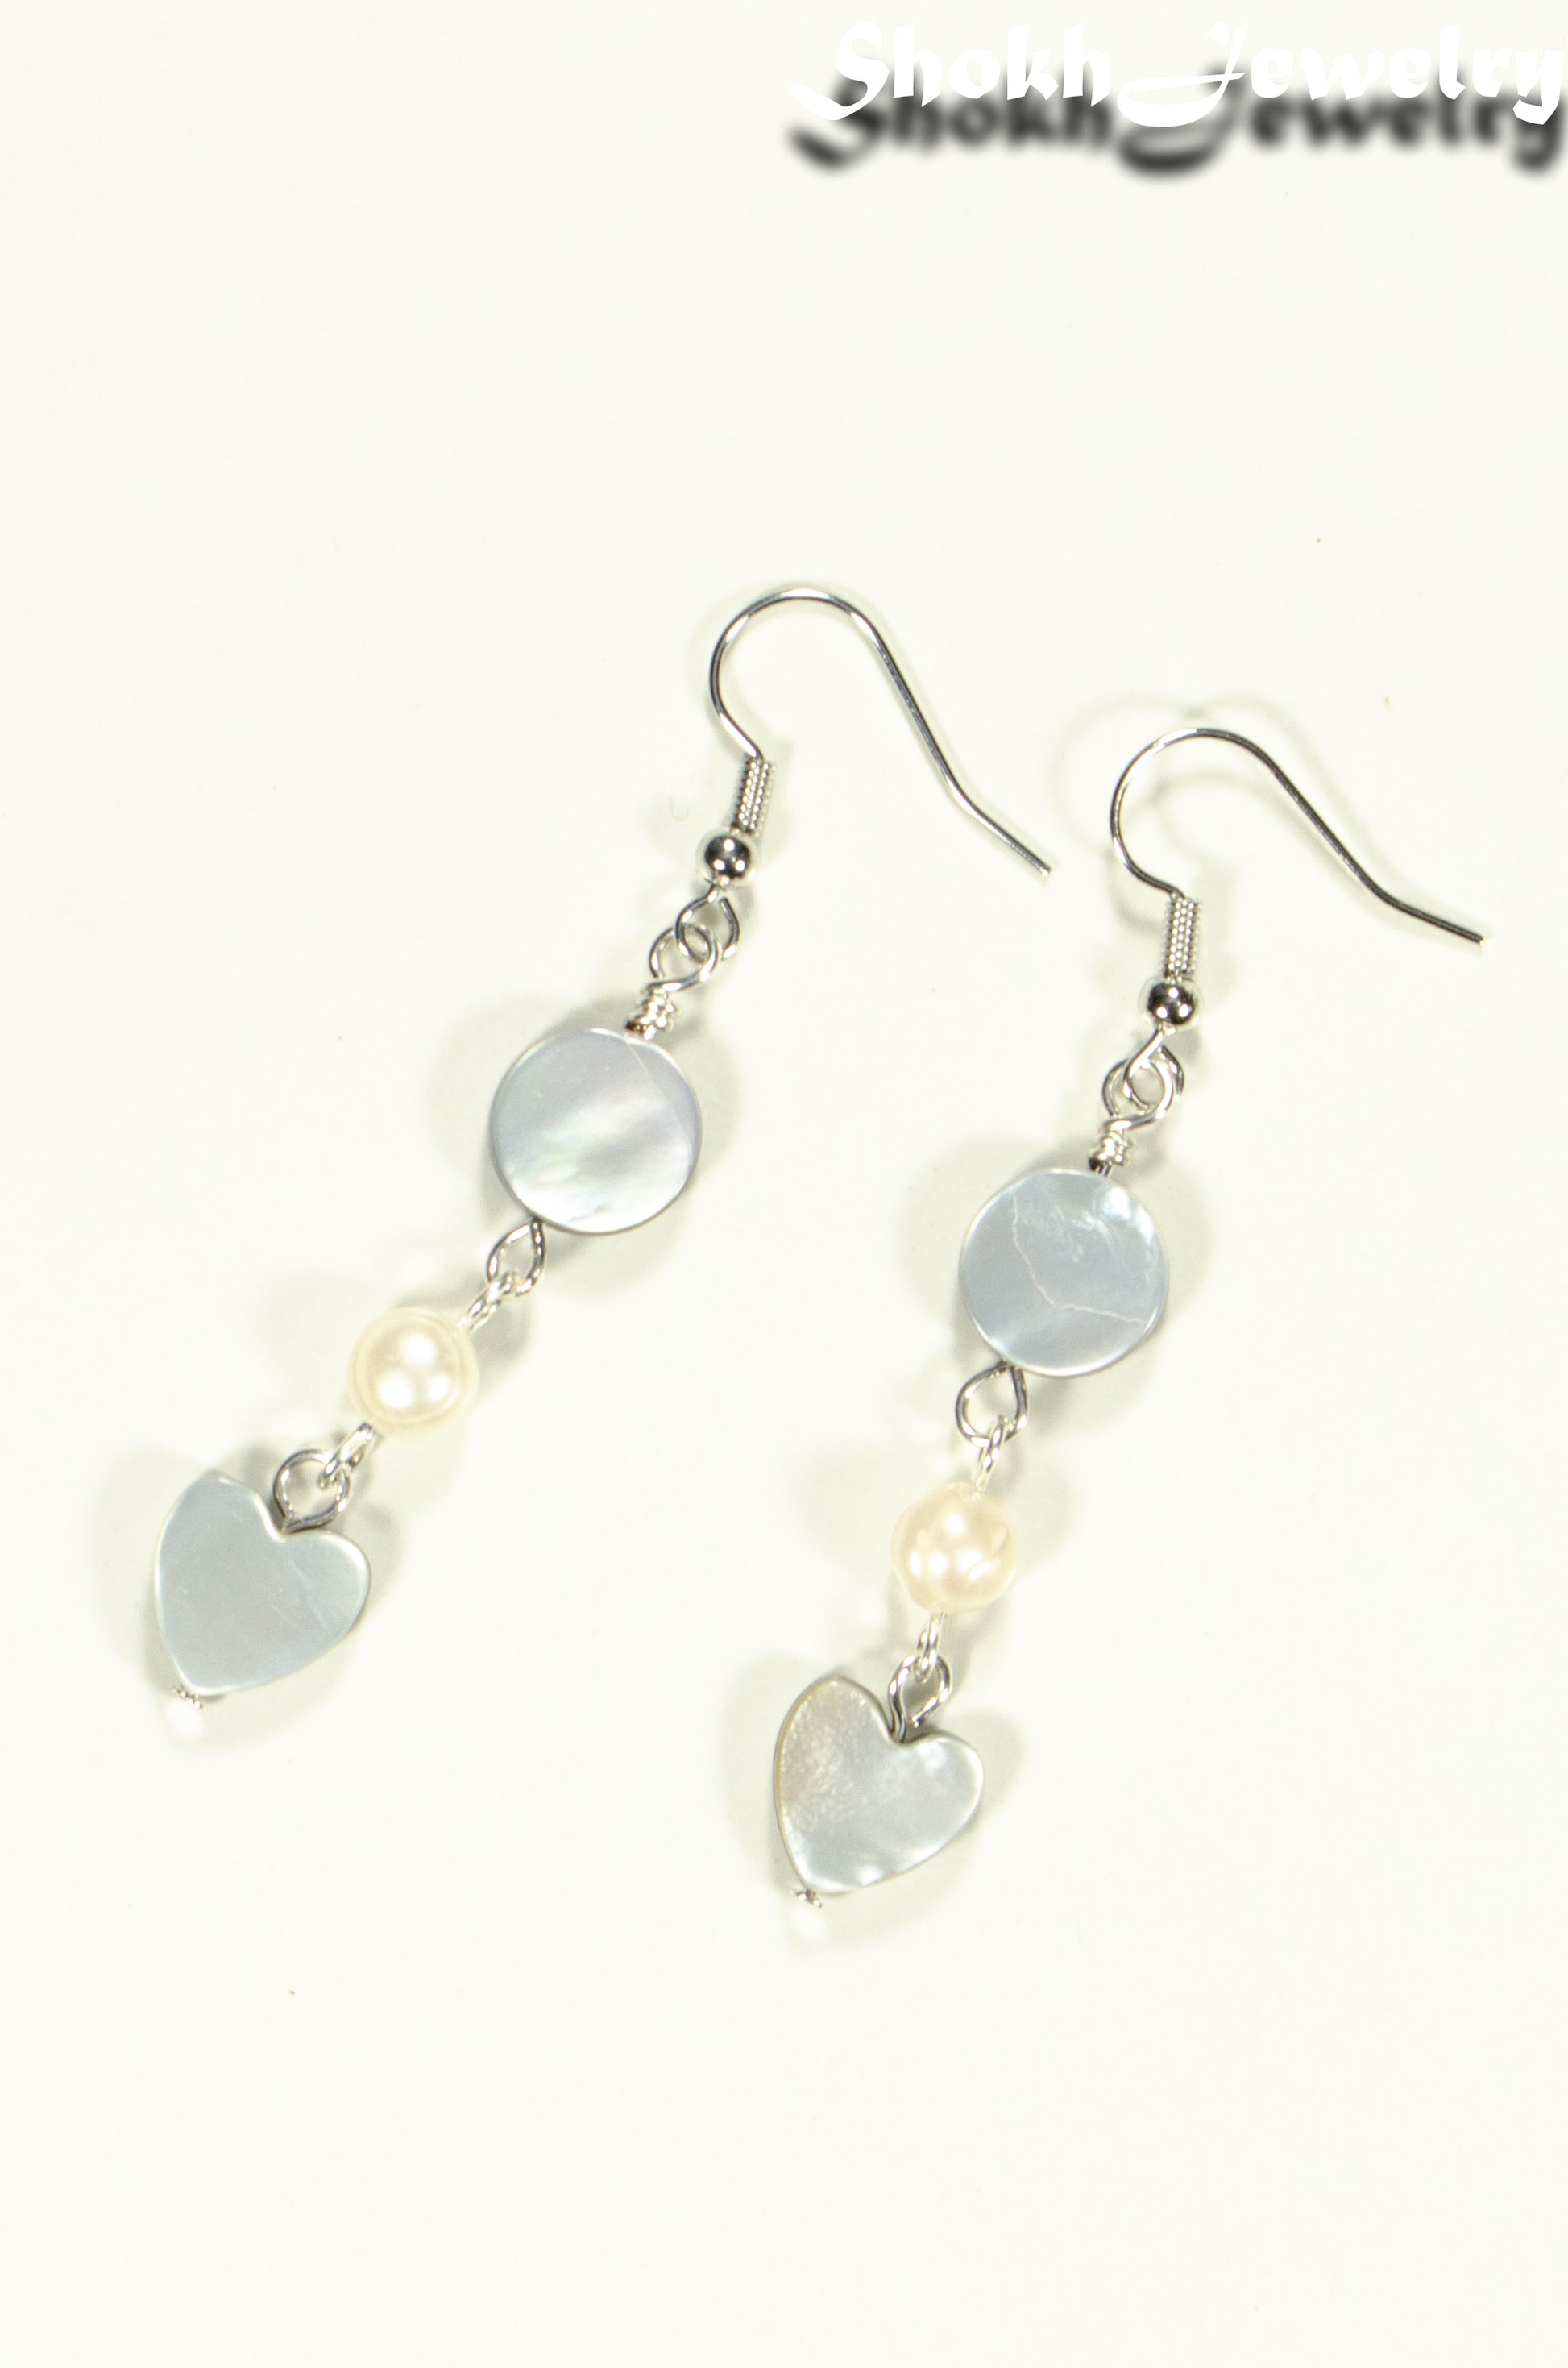 Top view of Grey Seashell and White Pearl Earrings.